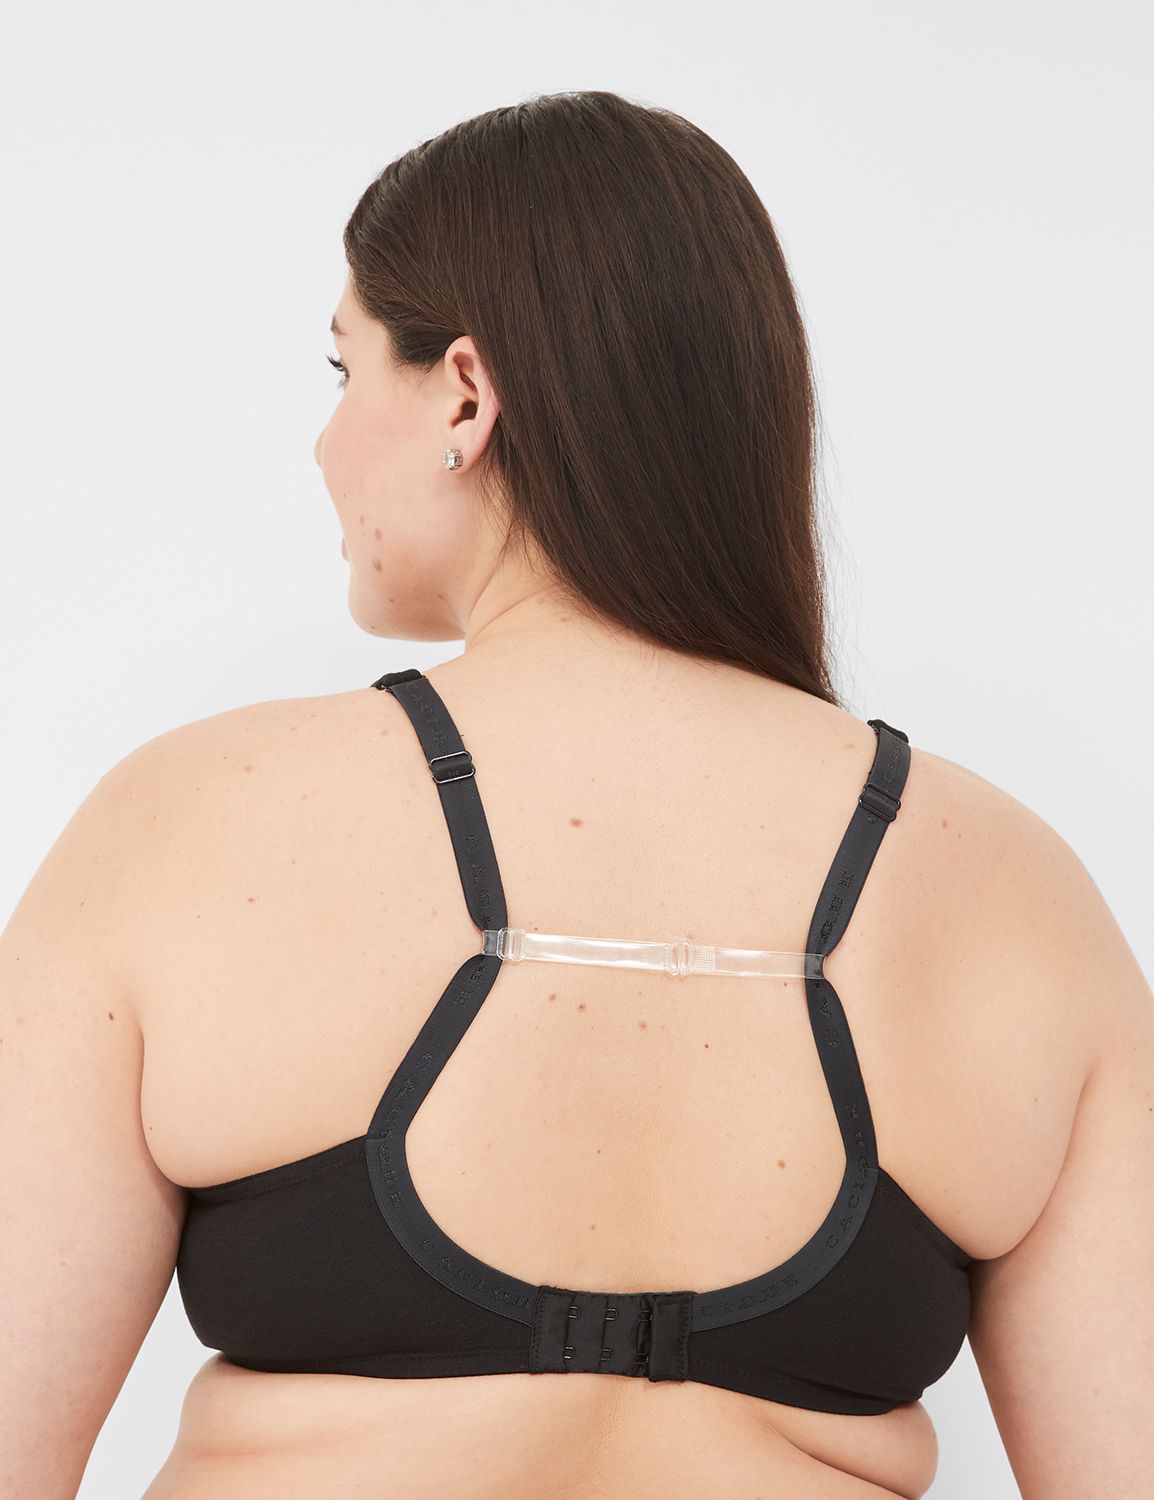 Wrap a bra strap below your strapless bra to keep it from slipping